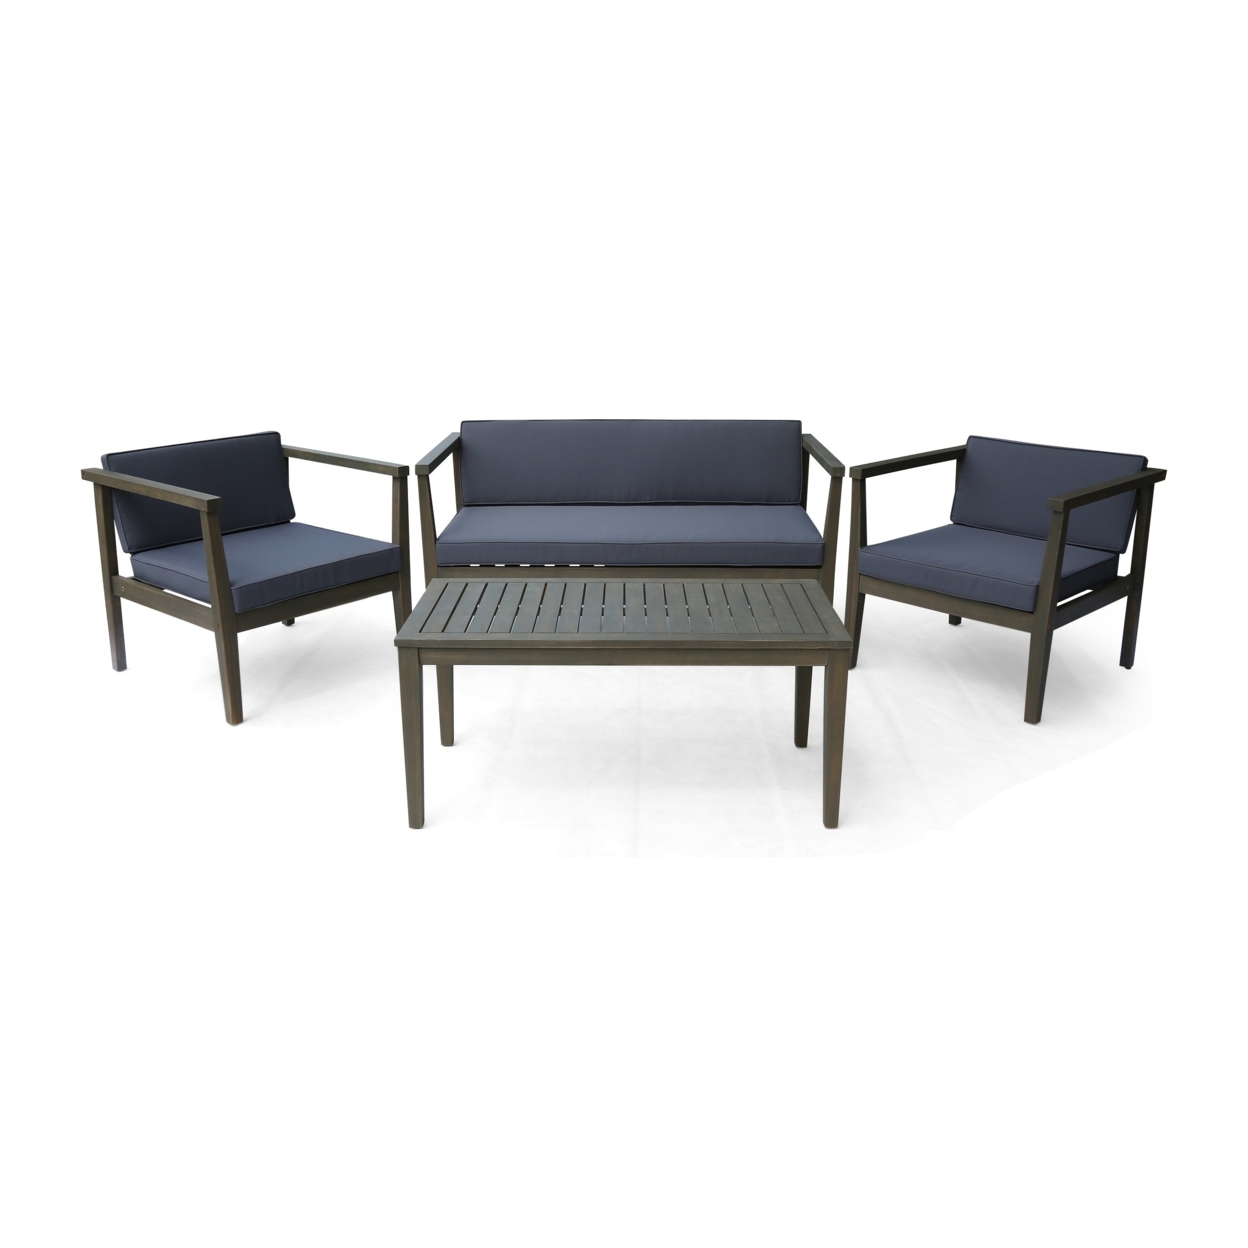 Maddox Outdoor 4-Seater Acacia Wood Chat Set With Coffee Table - Gray, Gray